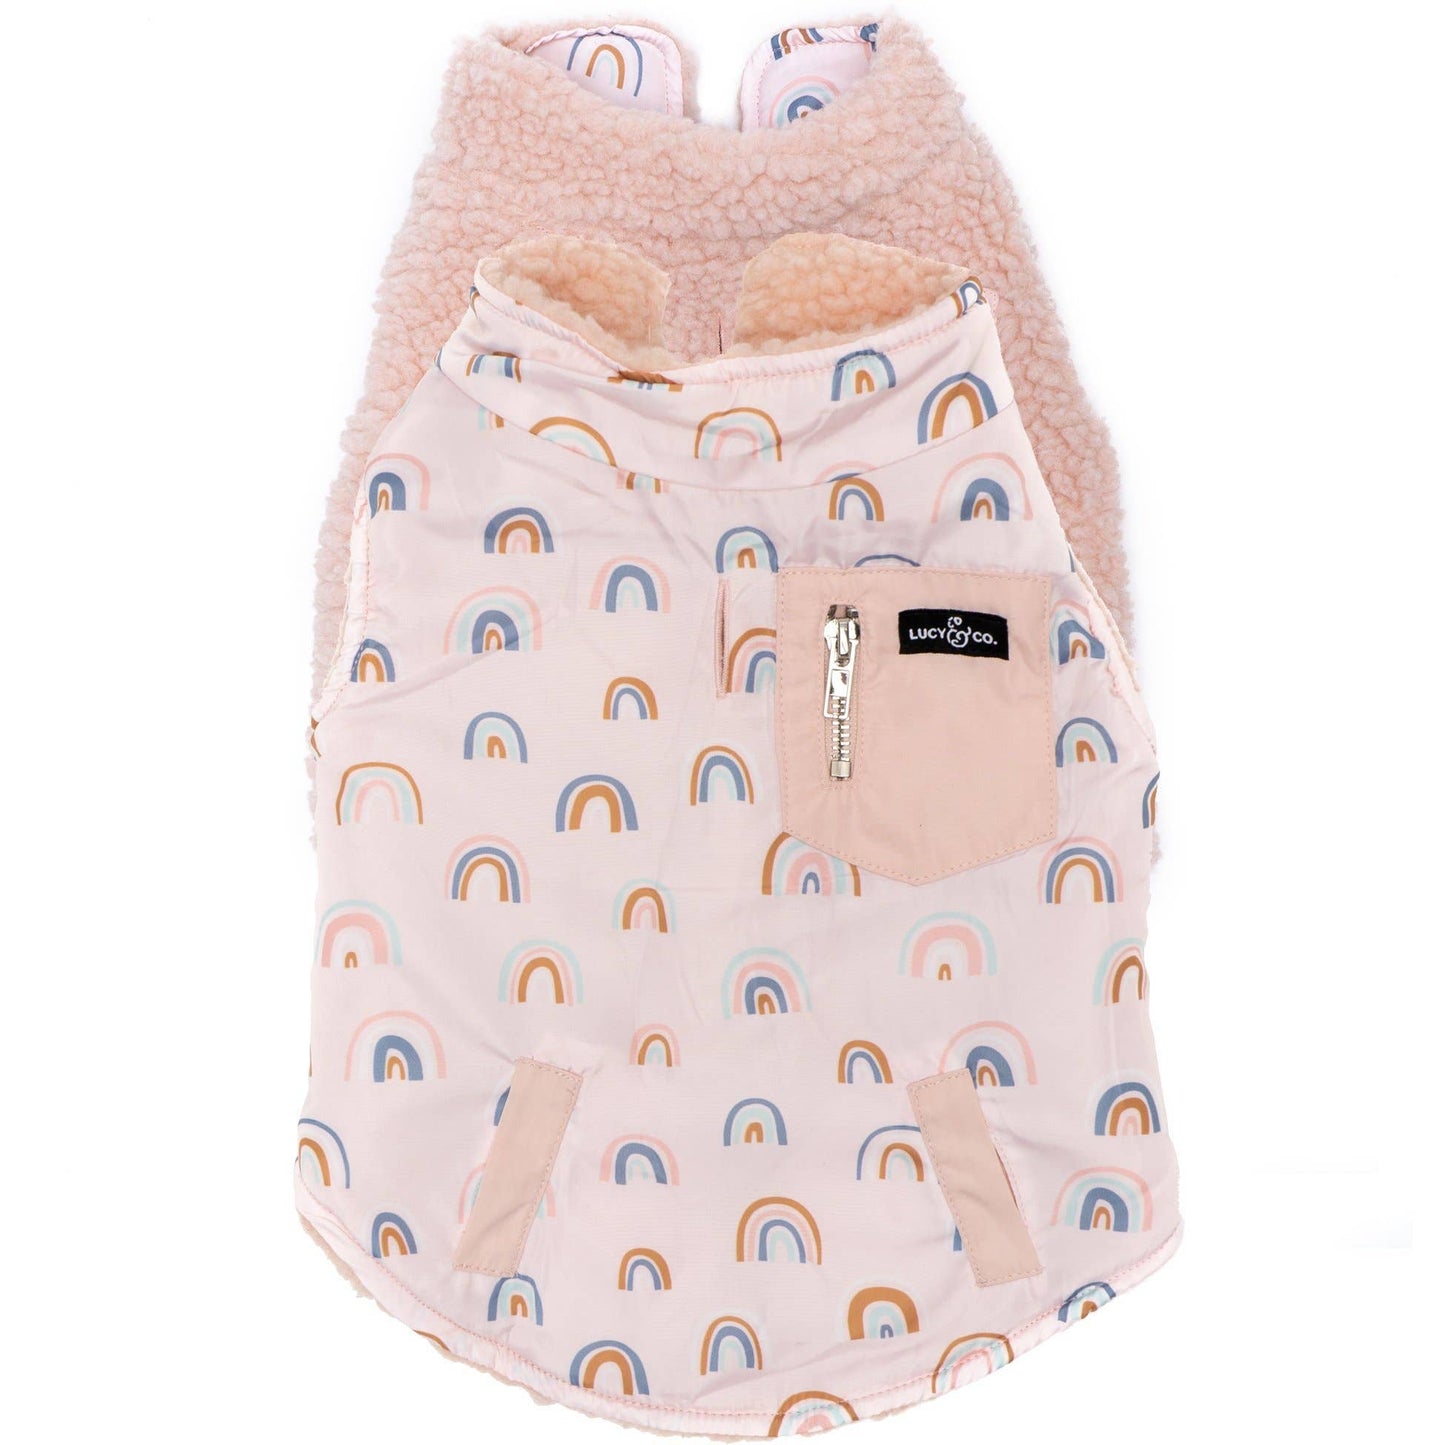 The In the Clouds Reversible Teddy Vest